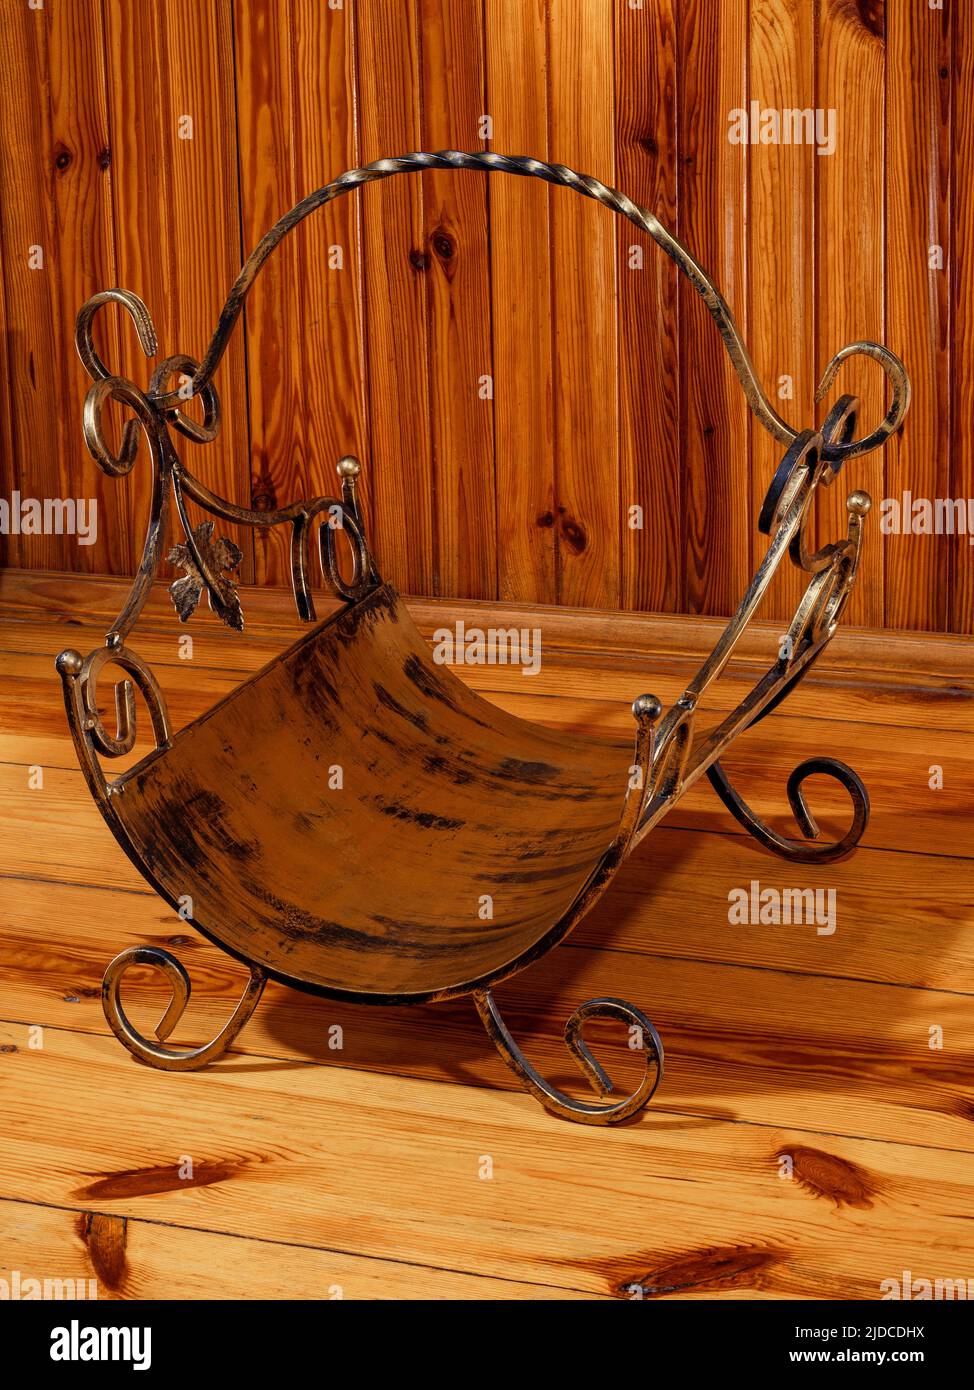 Antique empty metal firewood basket by a wooden wall Stock Photo